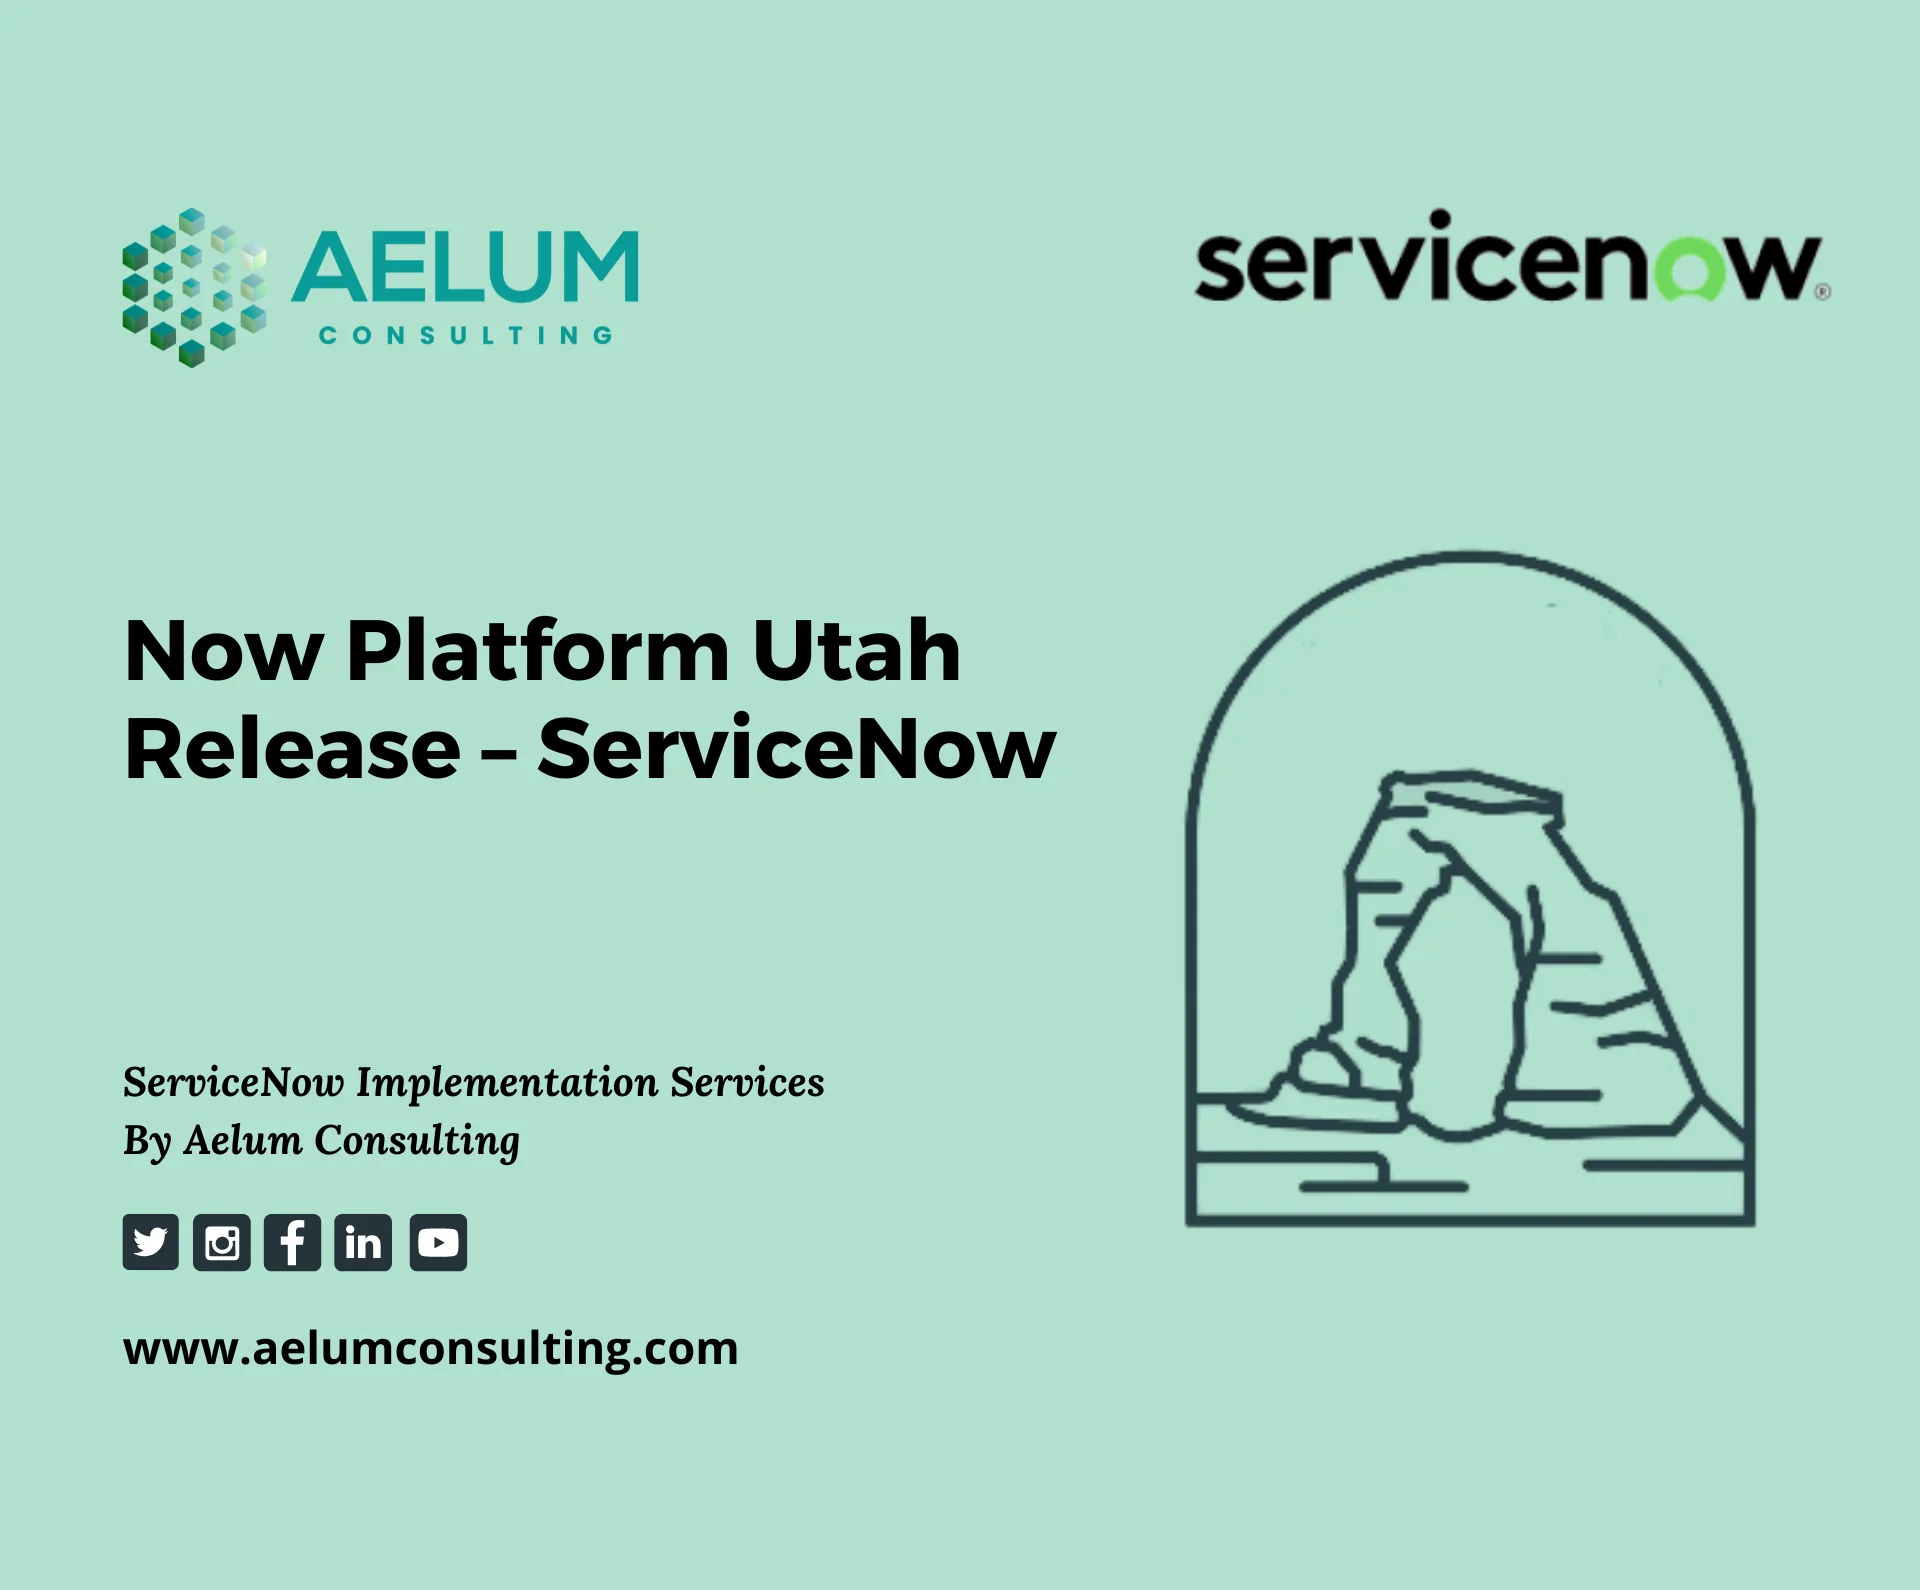 Webinar: What's new in the Utah Release for CSM - ServiceNow Community